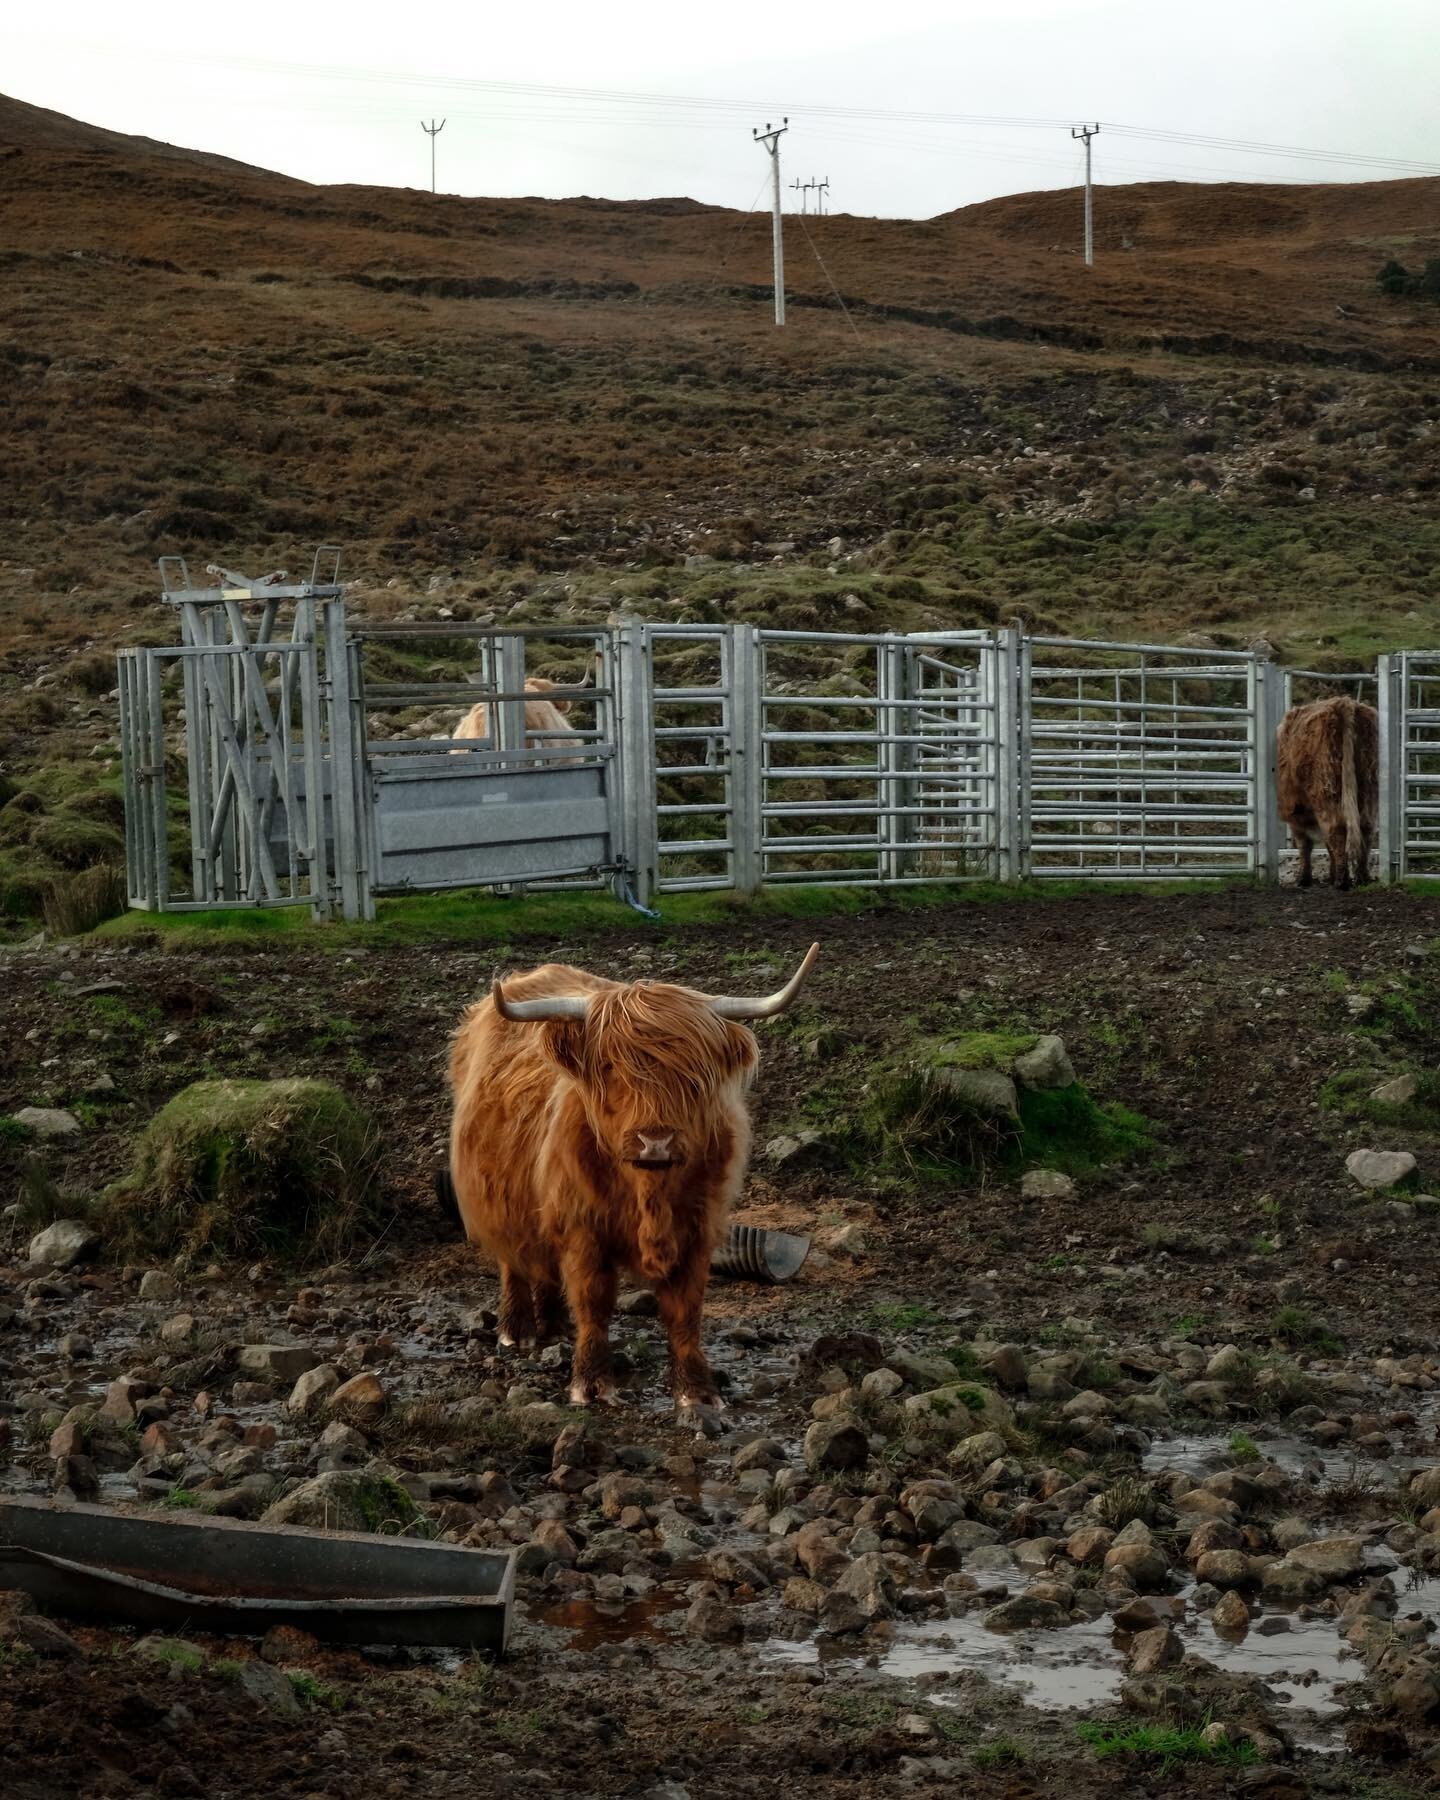 In the Highlands, the rain falls heavy, but not as heavy as the judgmental stare of a cow eyeing my mud-caked white sneakers. Maybe not my brightest idea 👀